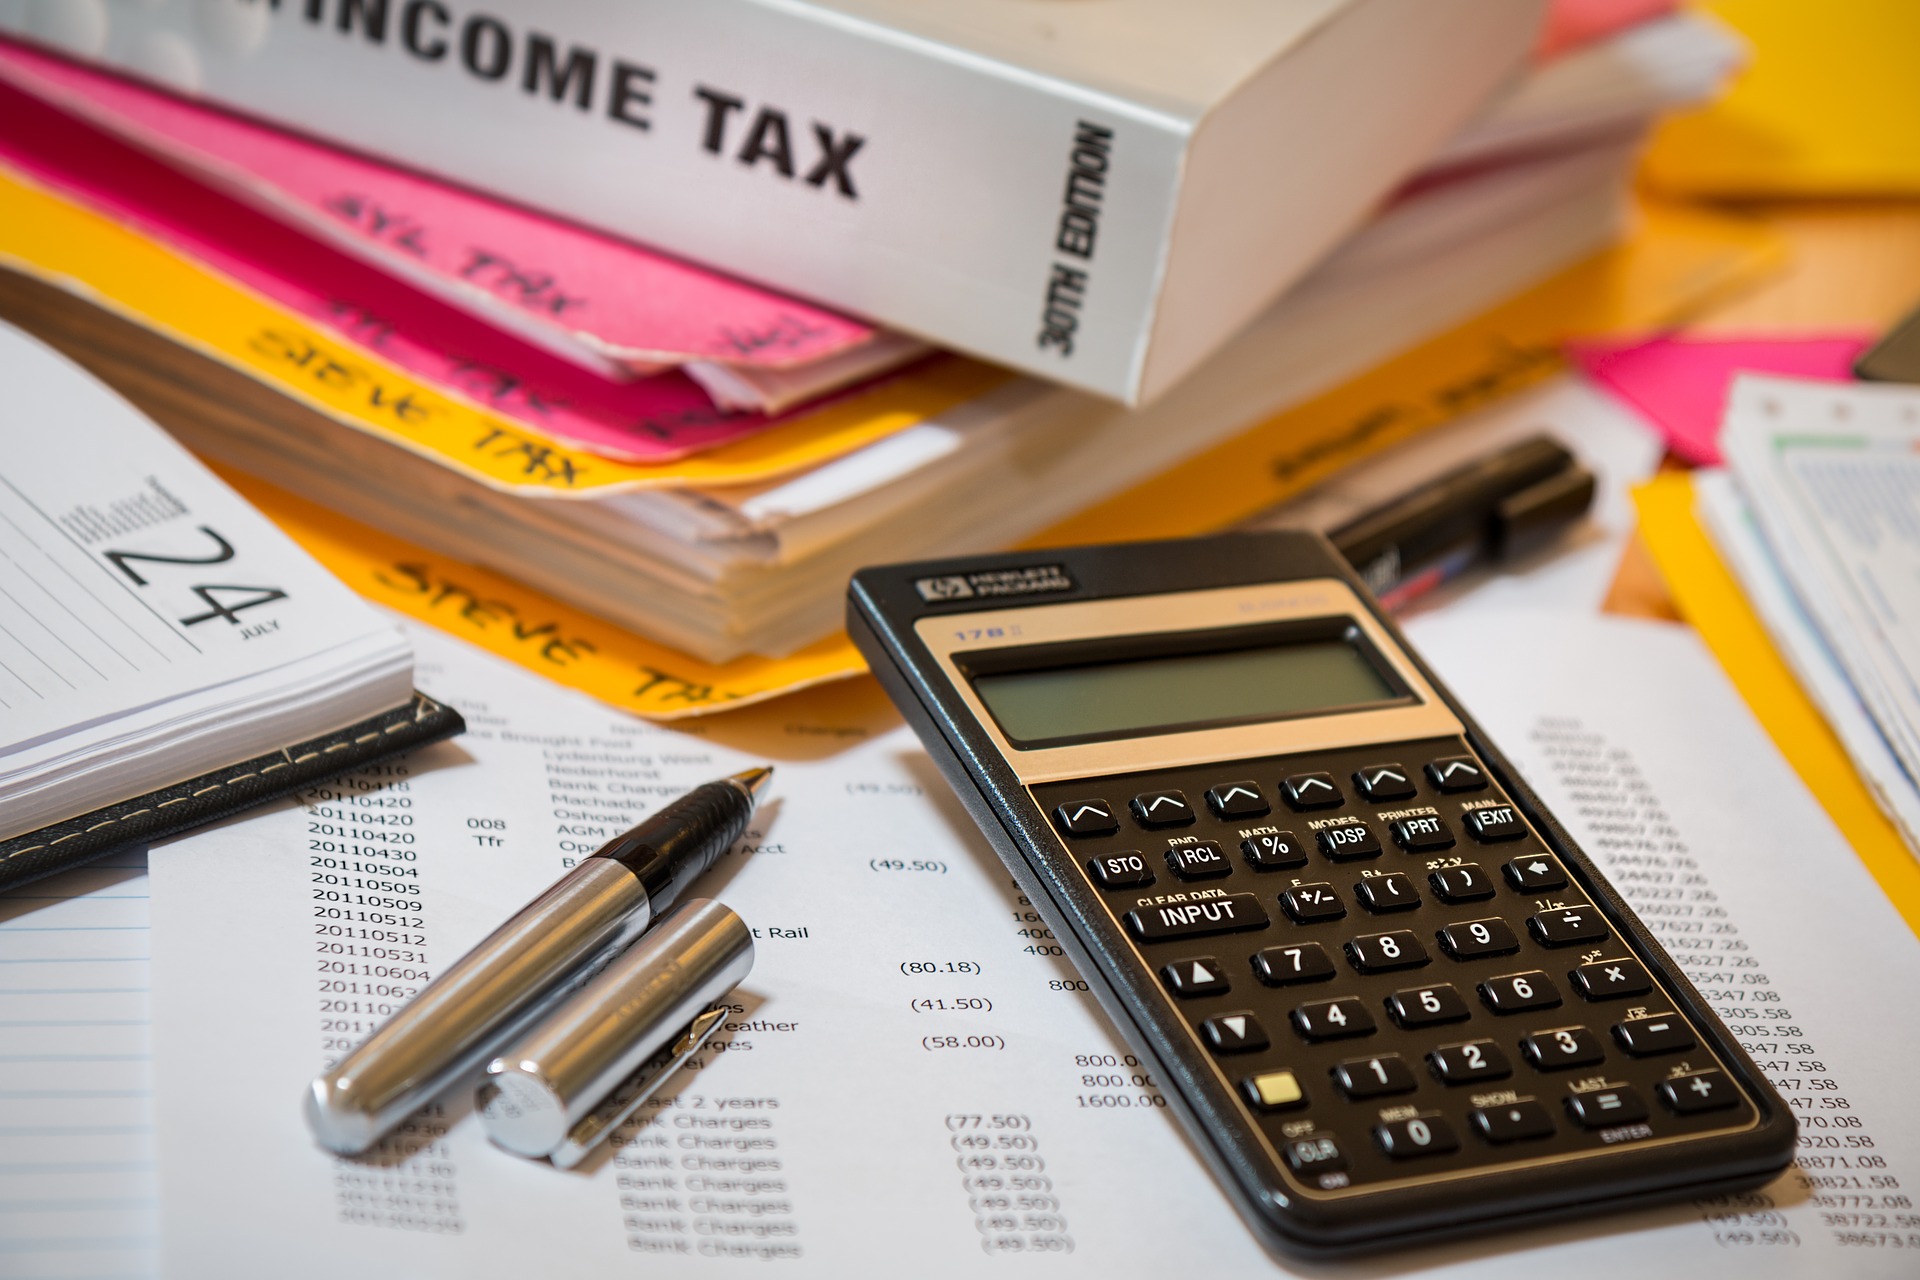 Can a tax attorney in Houston help reduce IRS debt?